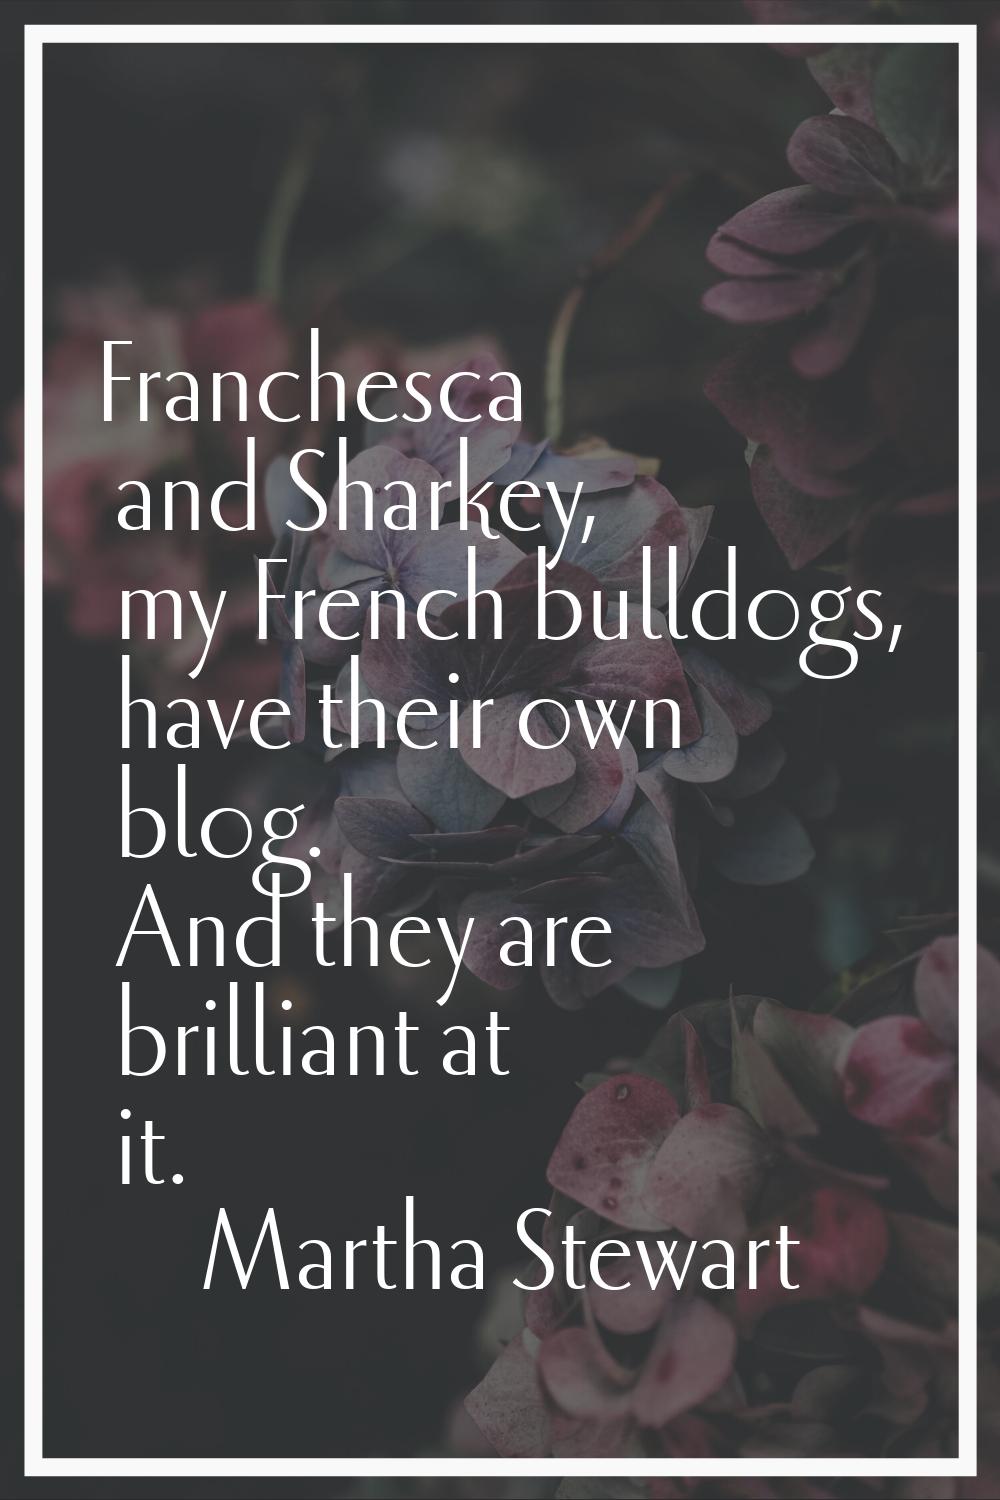 Franchesca and Sharkey, my French bulldogs, have their own blog. And they are brilliant at it.